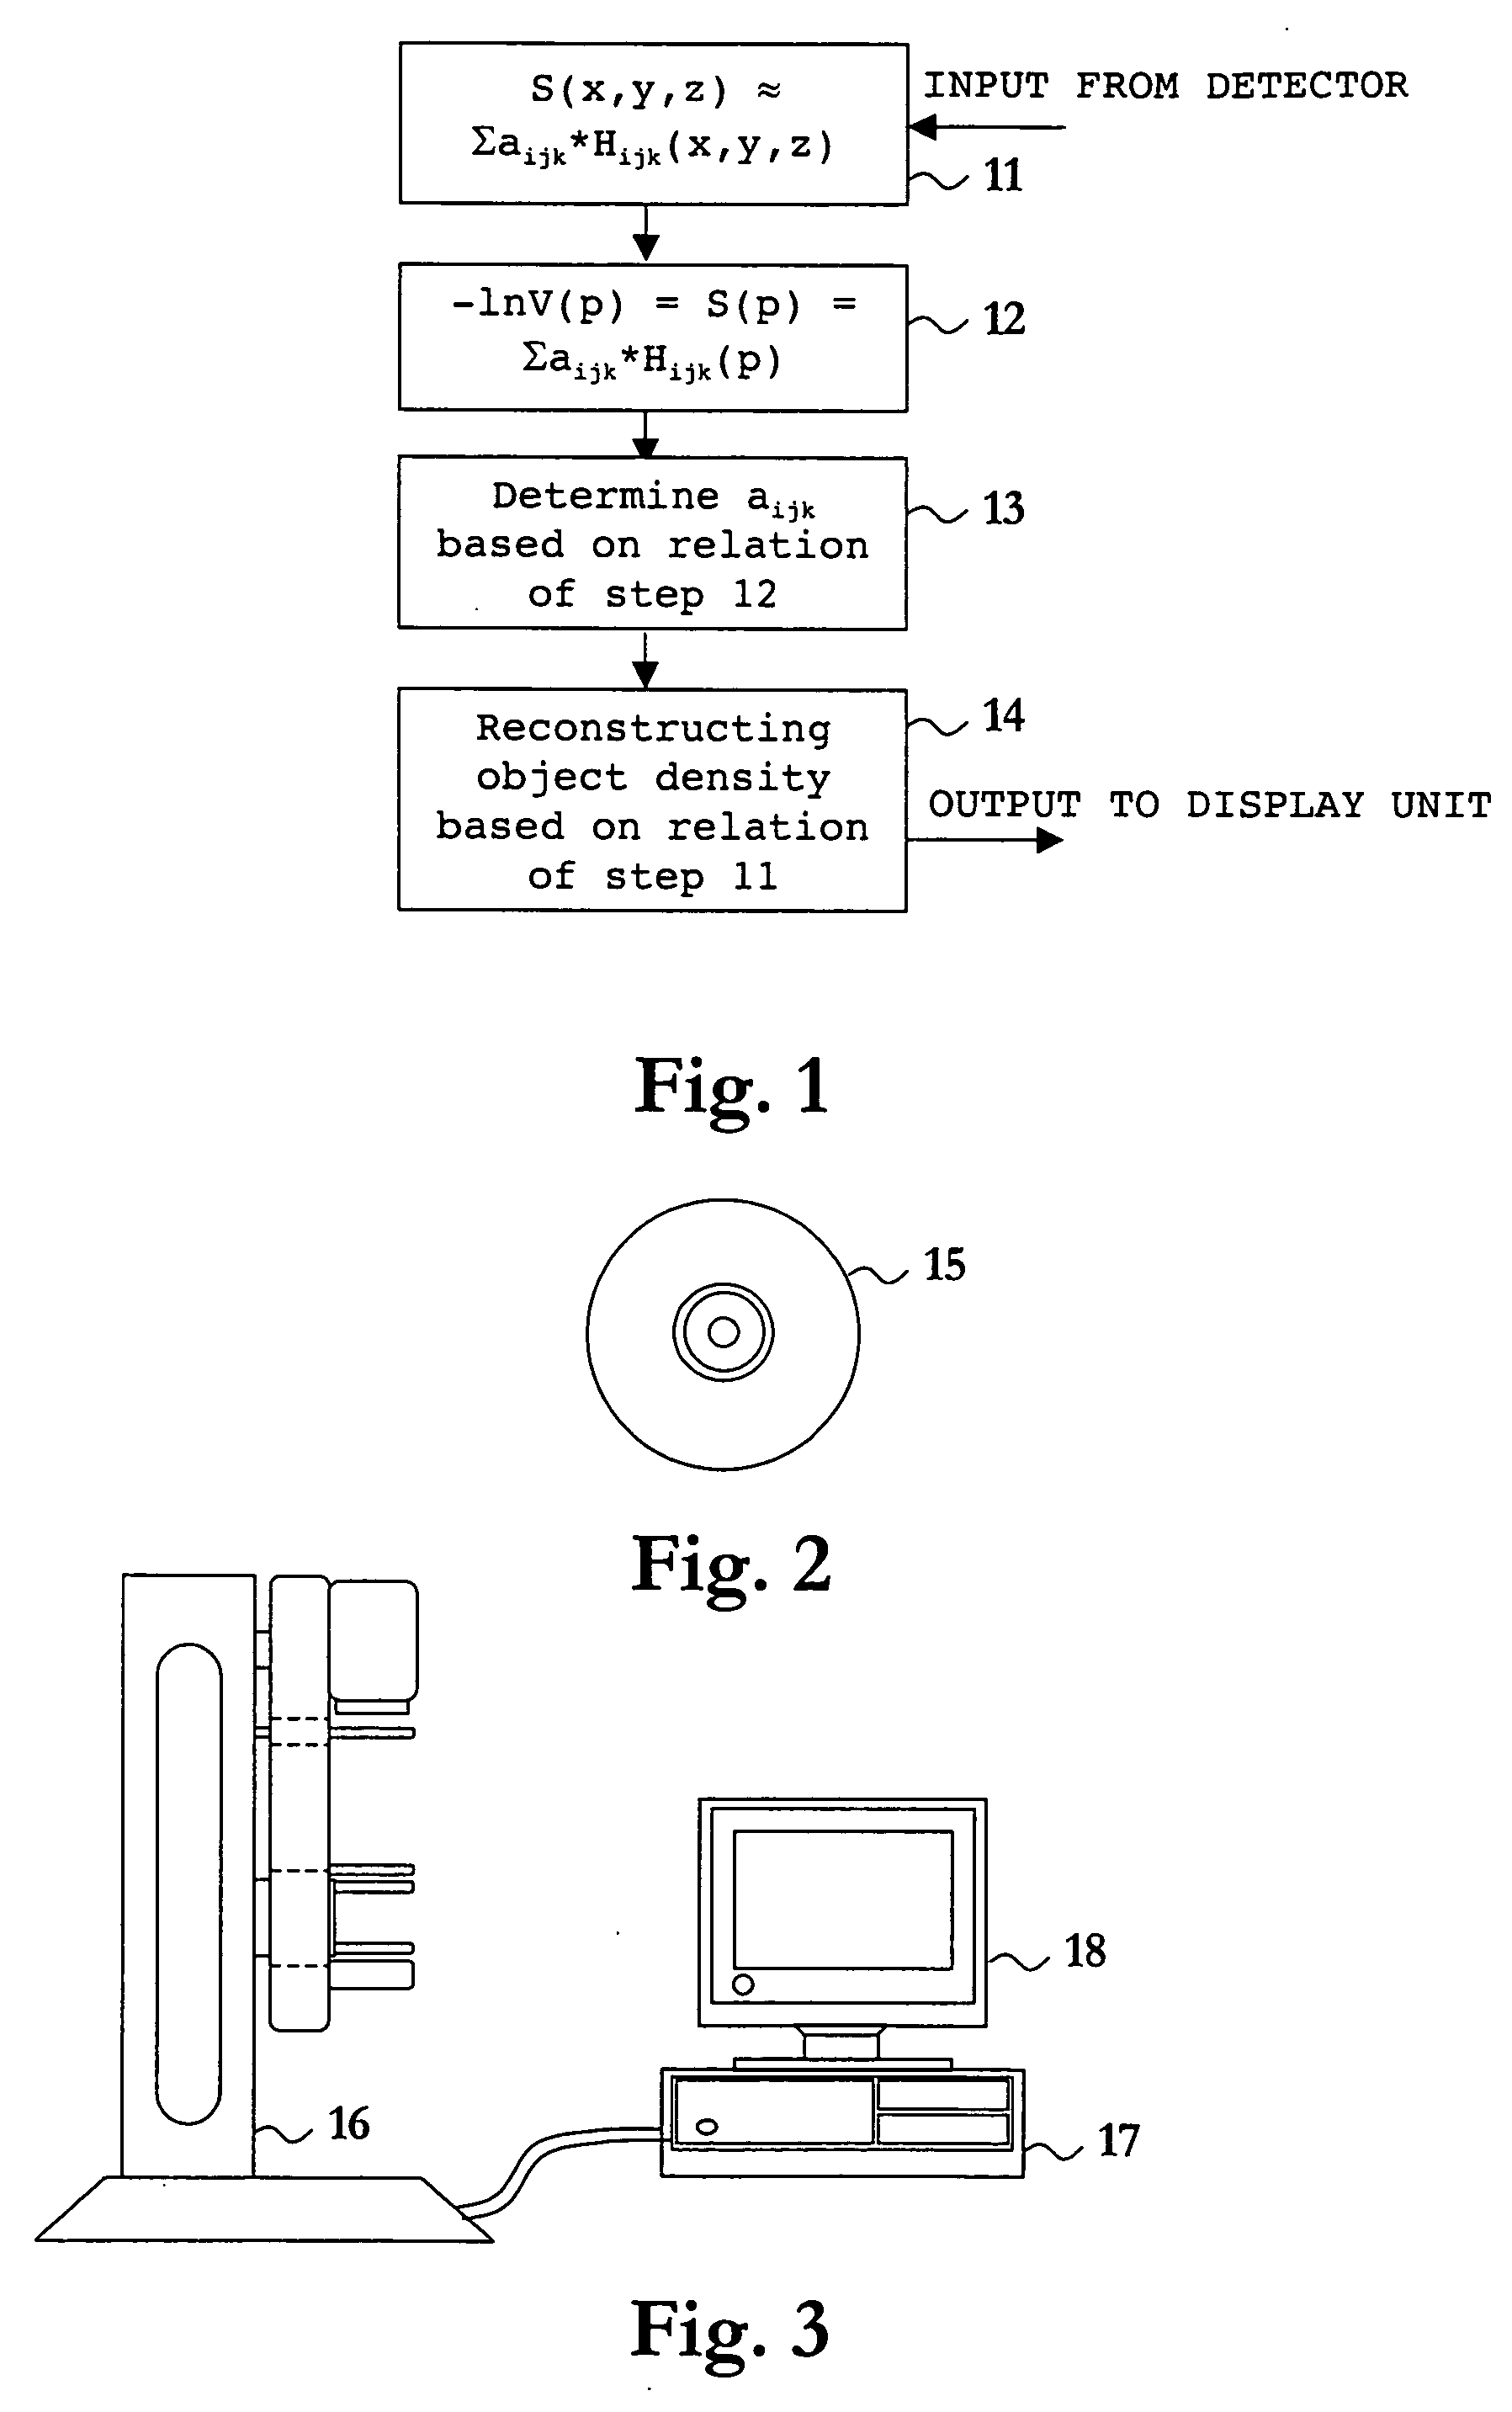 Method and apparatus for reconstruction of the attenuation density of an object from x-ray projection image data